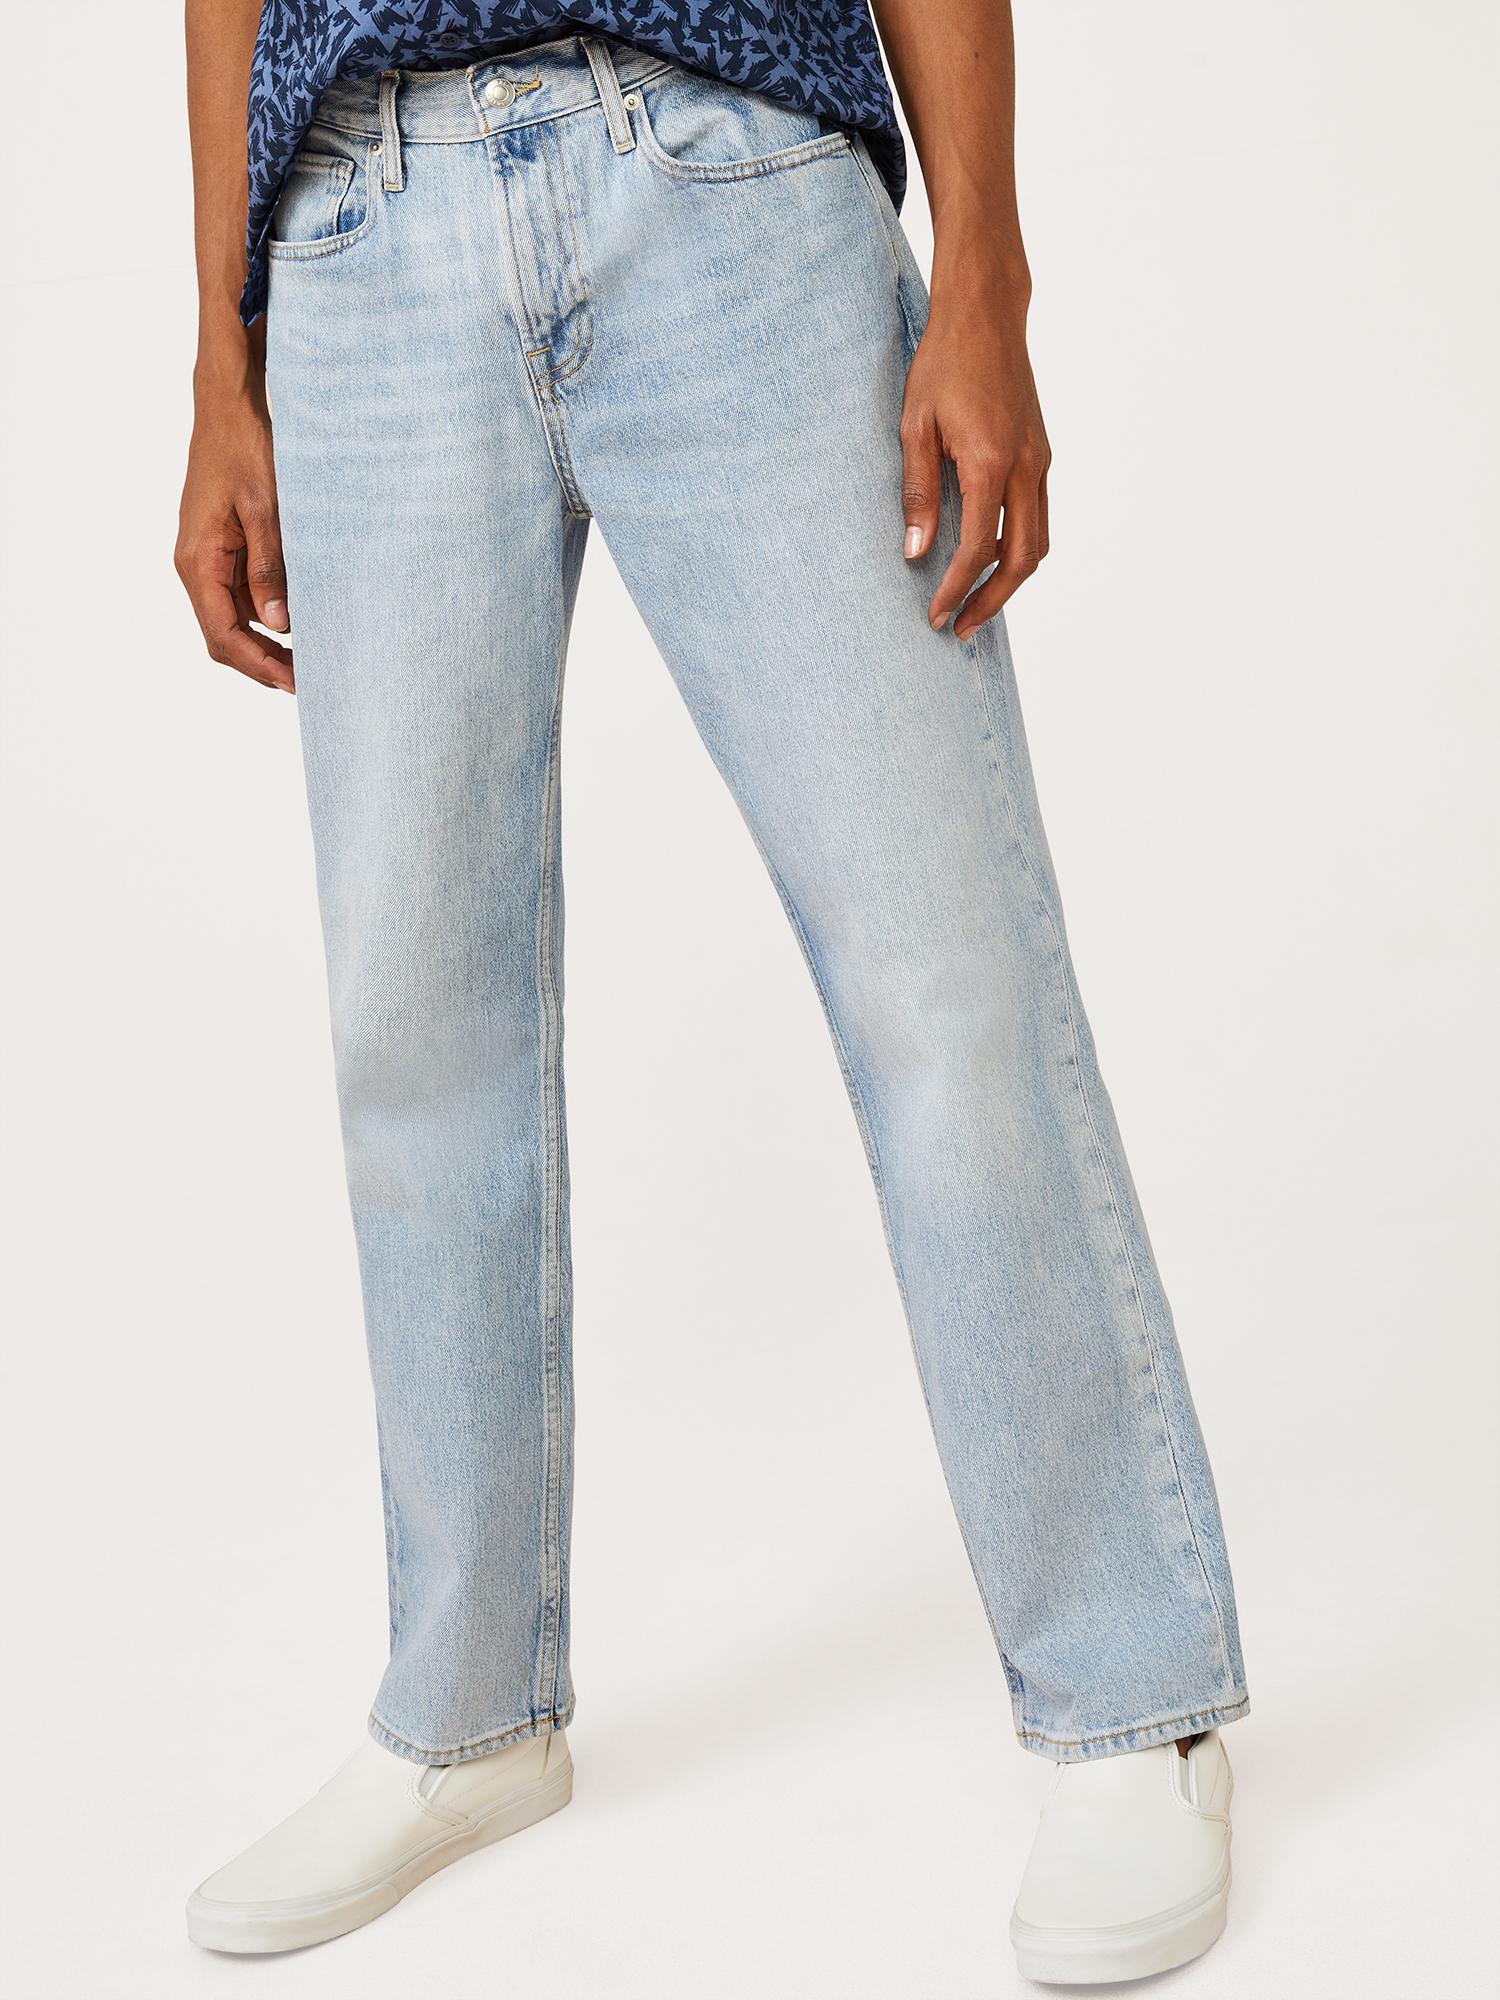 Free Assembly Men's Easy Beach Jeans - image 1 of 7